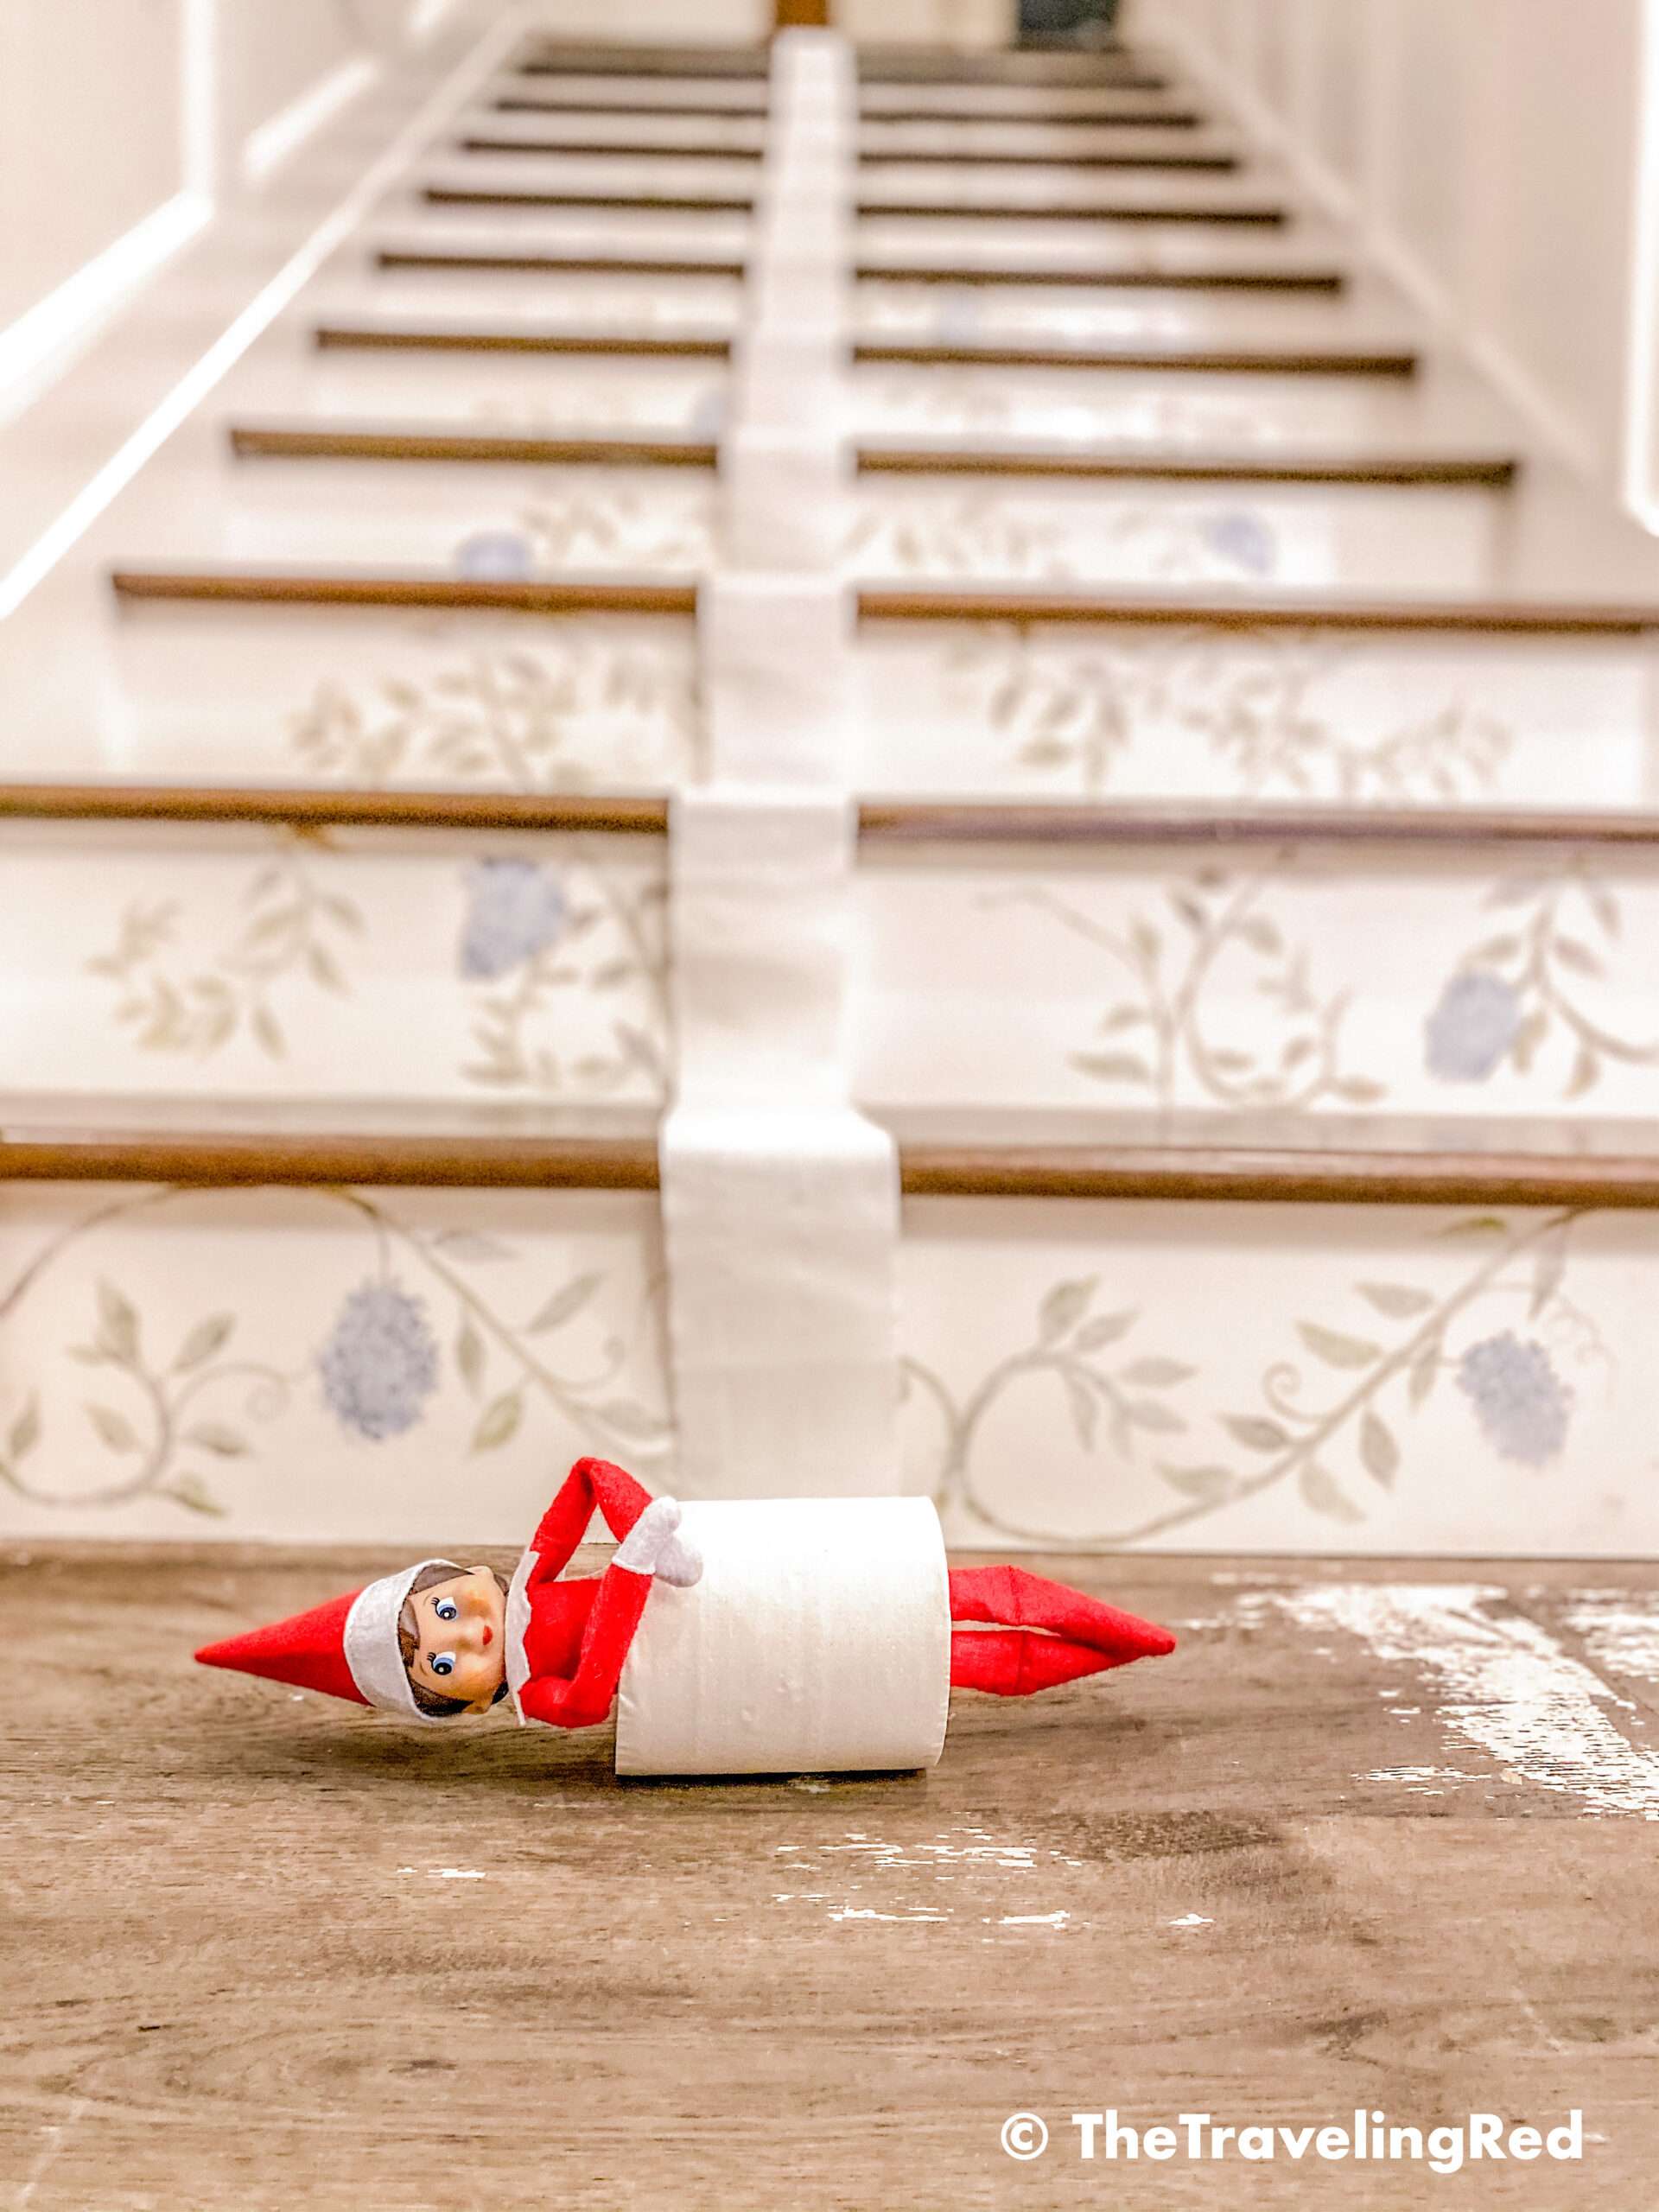 Naughty Elf on the shelf rolled down the staircase in a roll of toilet paper. Fun and easy elf on the shelf ideas for a naughty elf that are quick and easy using things you have at home.